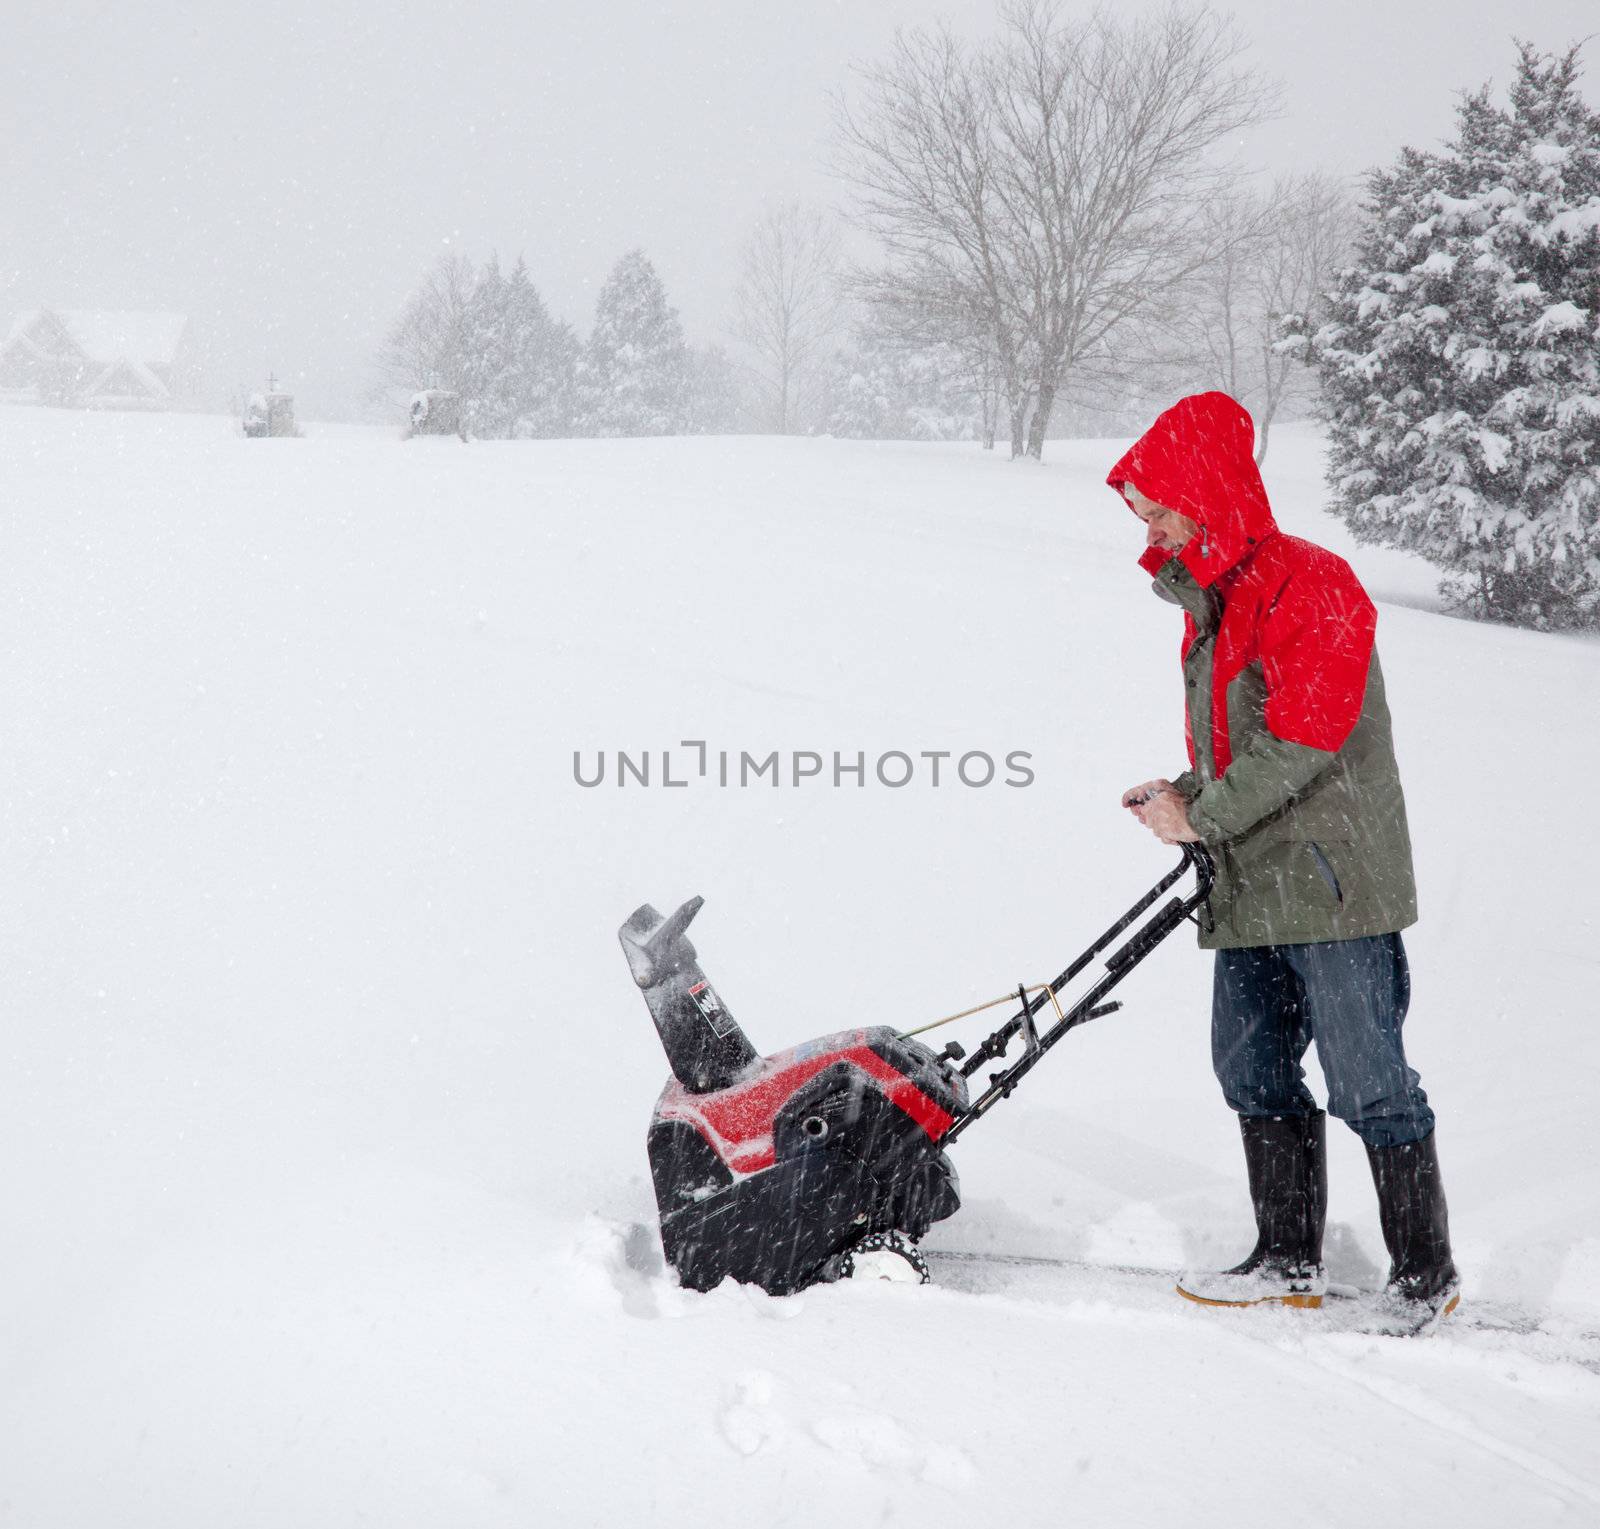 Man using snow blower on snowy drive by steheap